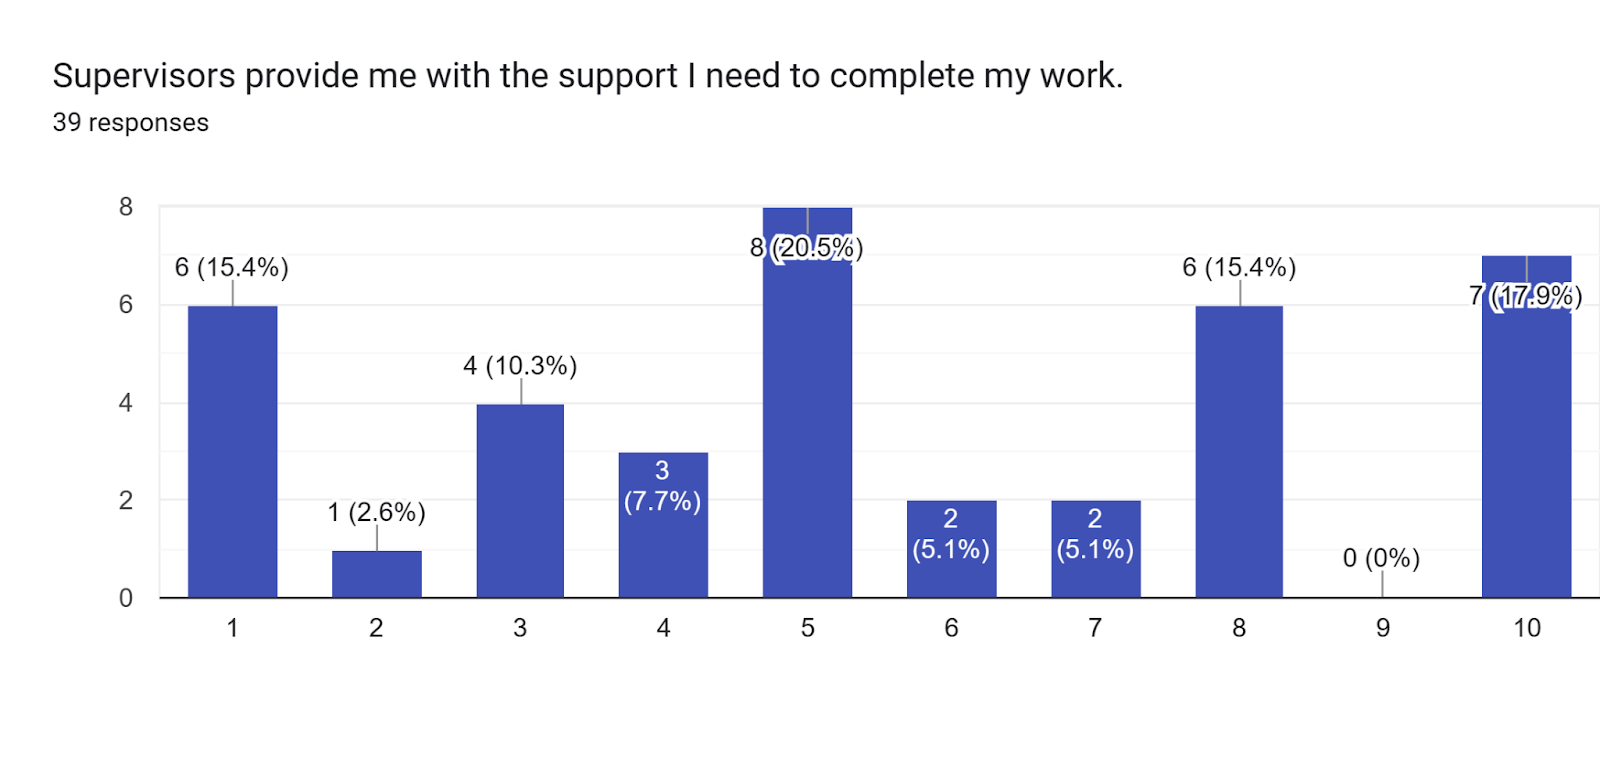 Forms response chart. Question title: Supervisors provide me with the support I need to complete my work.. Number of responses: 39 responses.